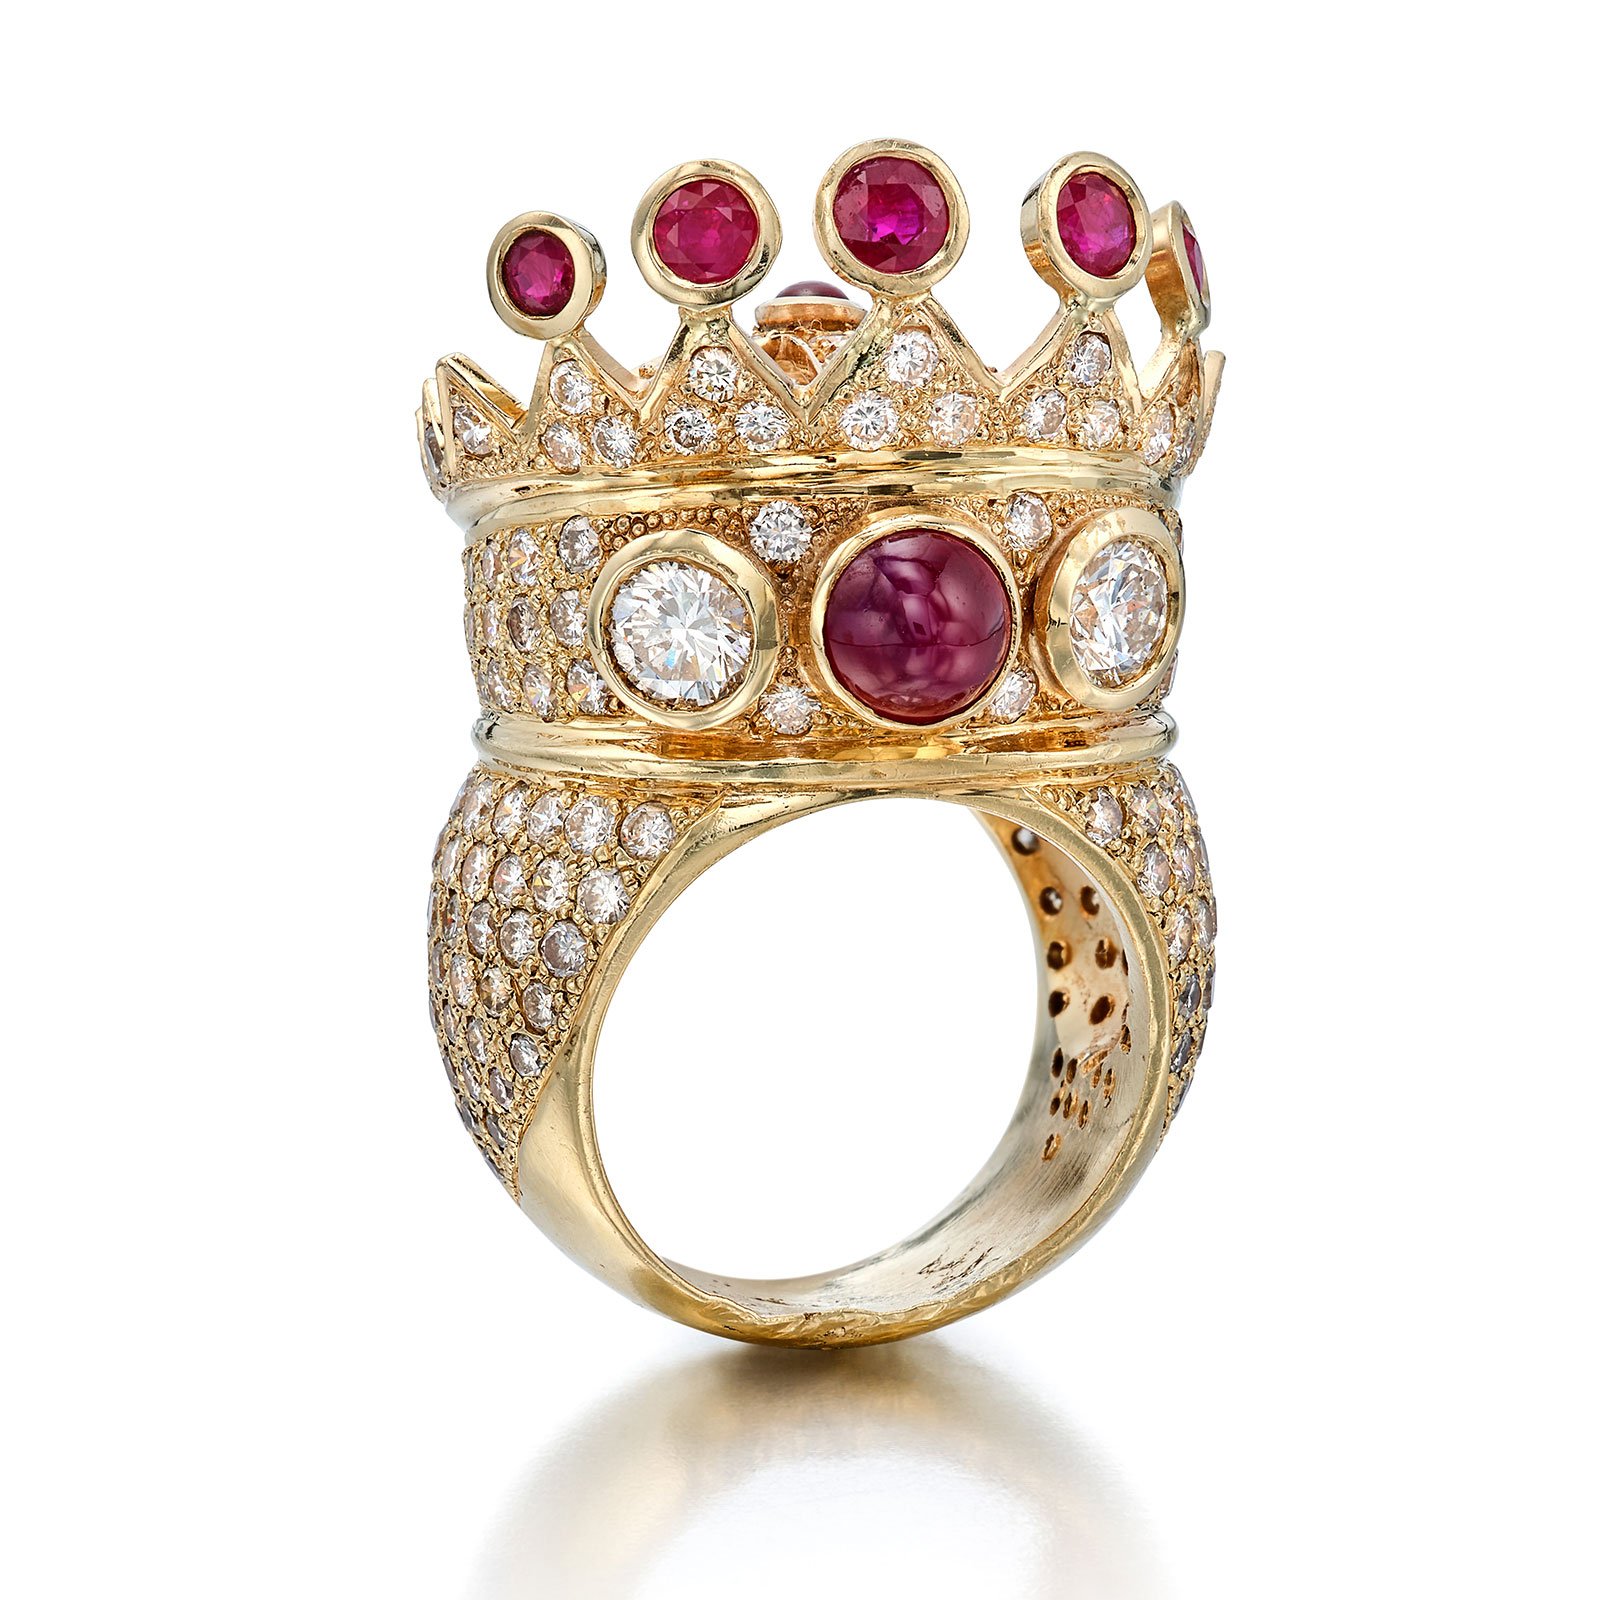 Tupac Shakur's Self-Designed 'Crown' Ring Could Fetch $300,000 at